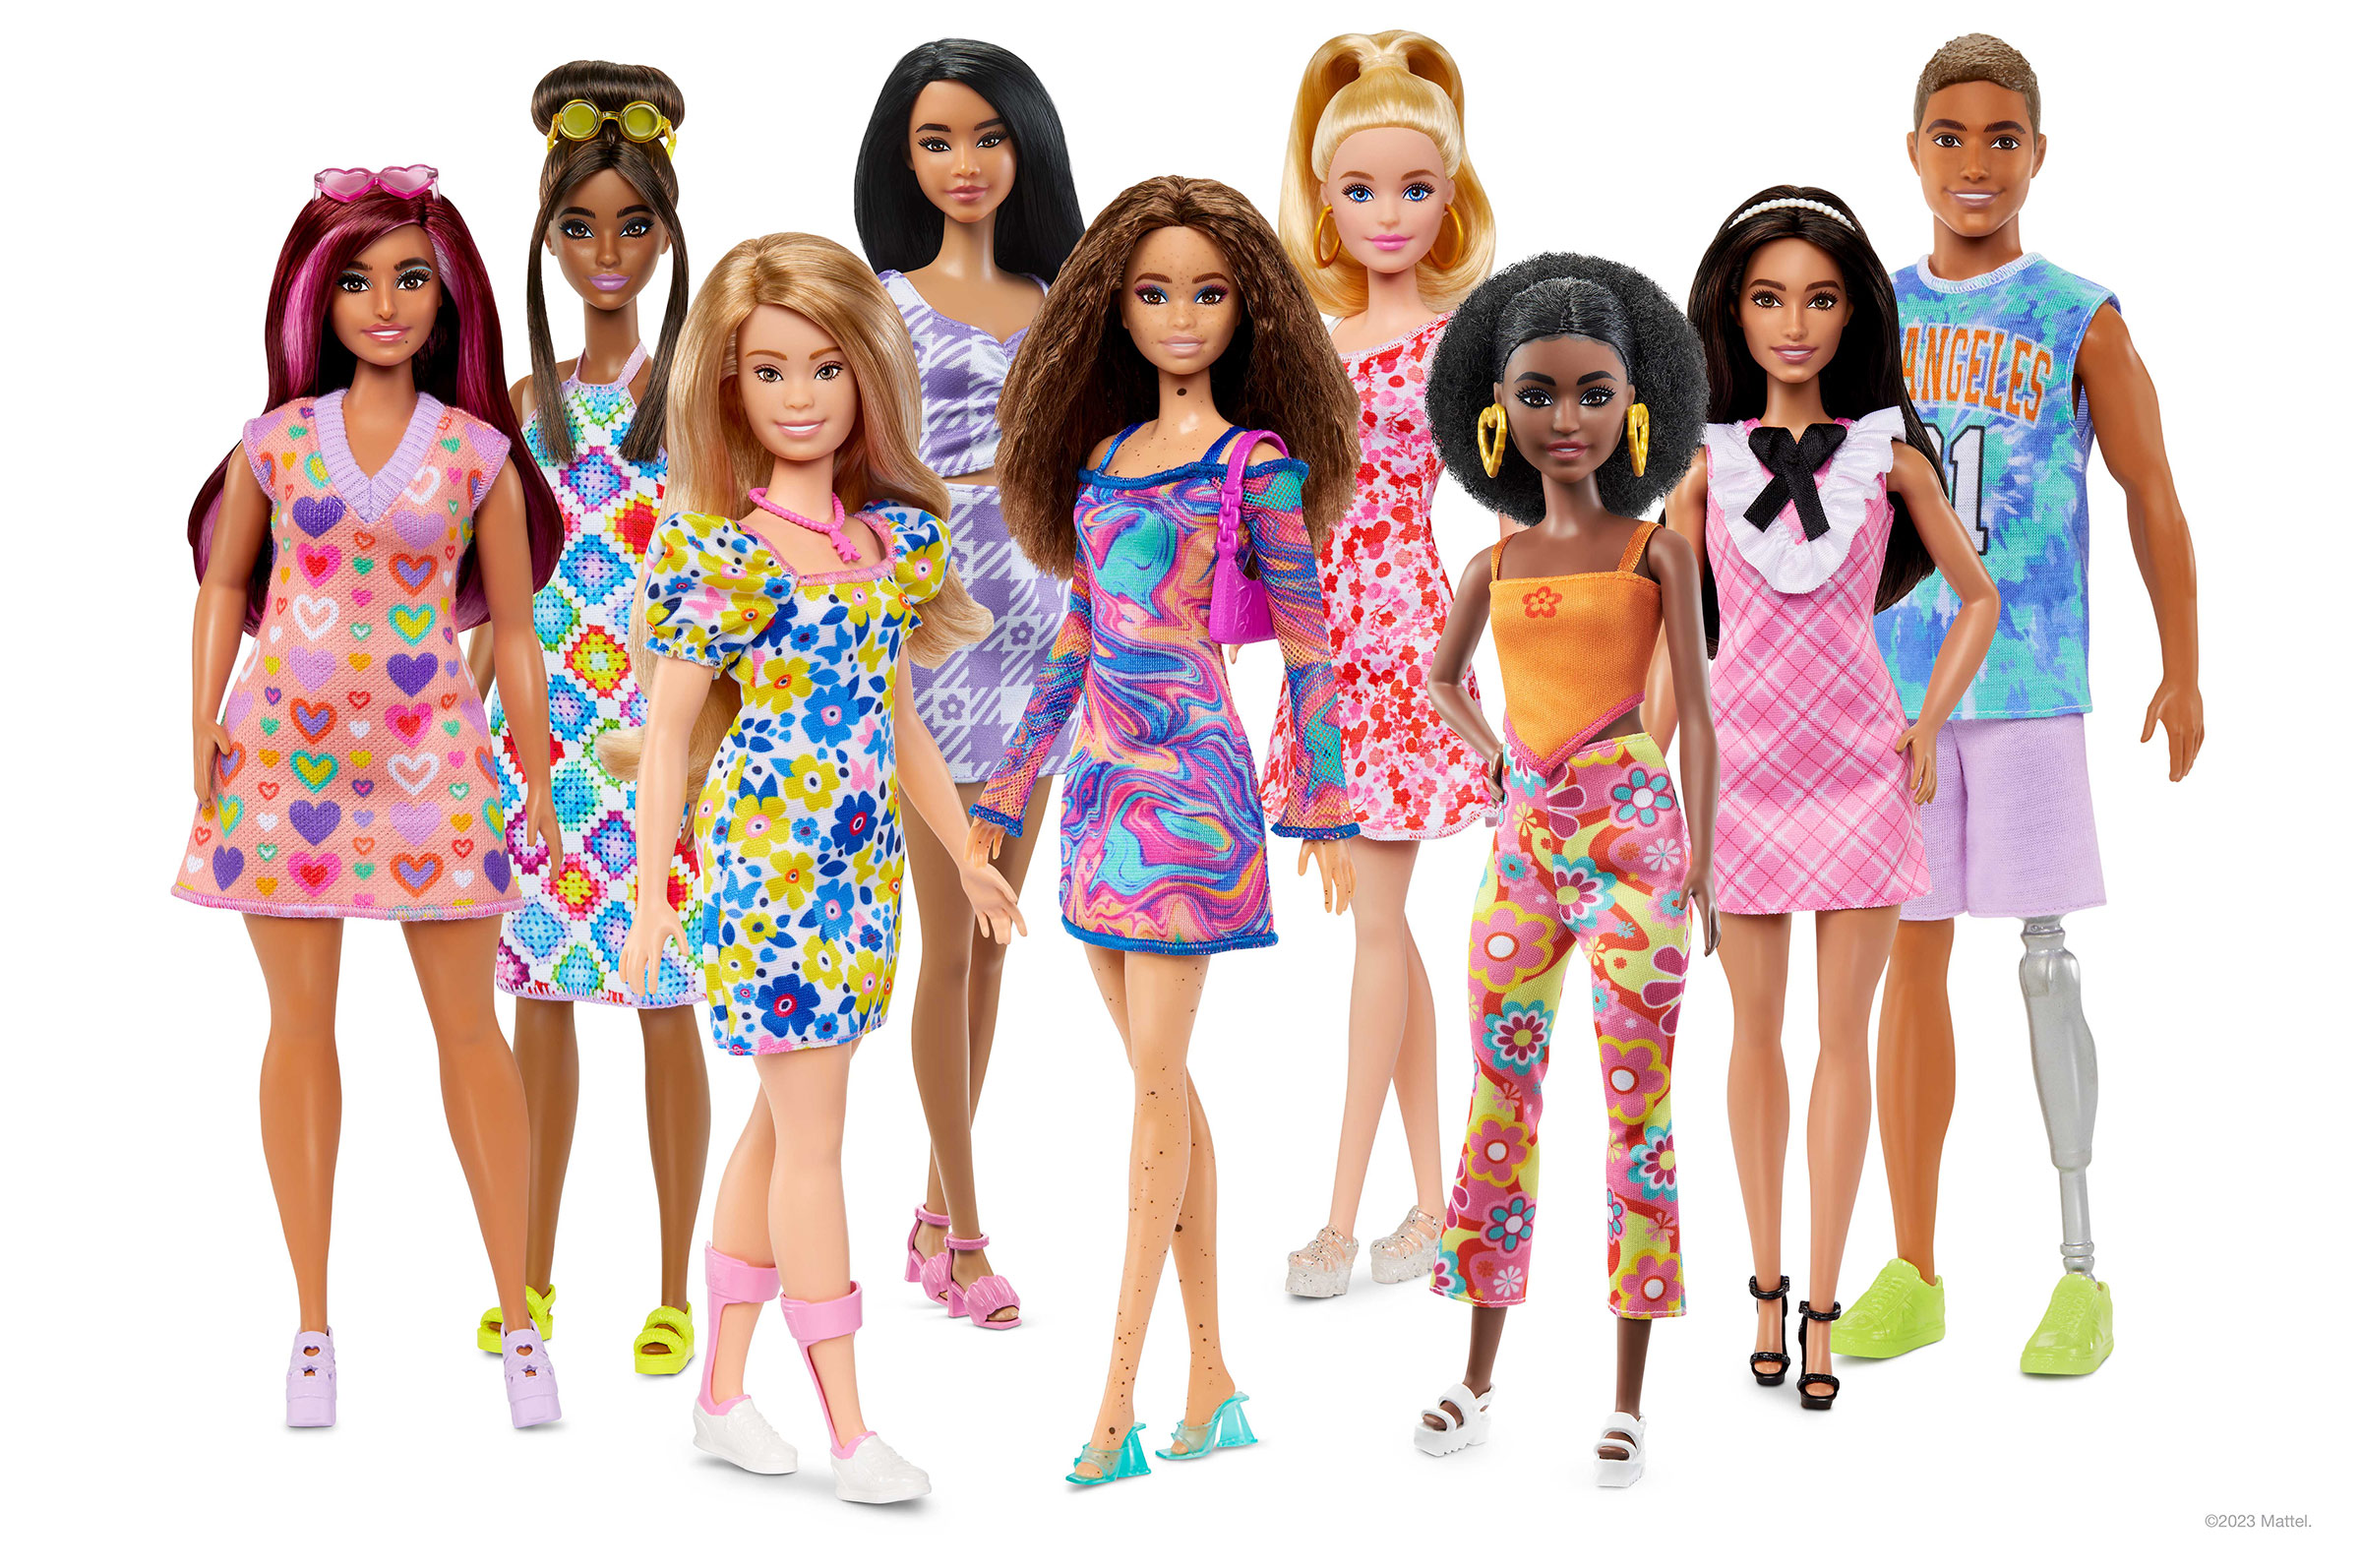 The Barbie Fashionistas line, including the first ever Barbie doll to depict Down’s syndrome features. (Jason Tidwell—Mattel, Inc./Cover Images/Reuters)